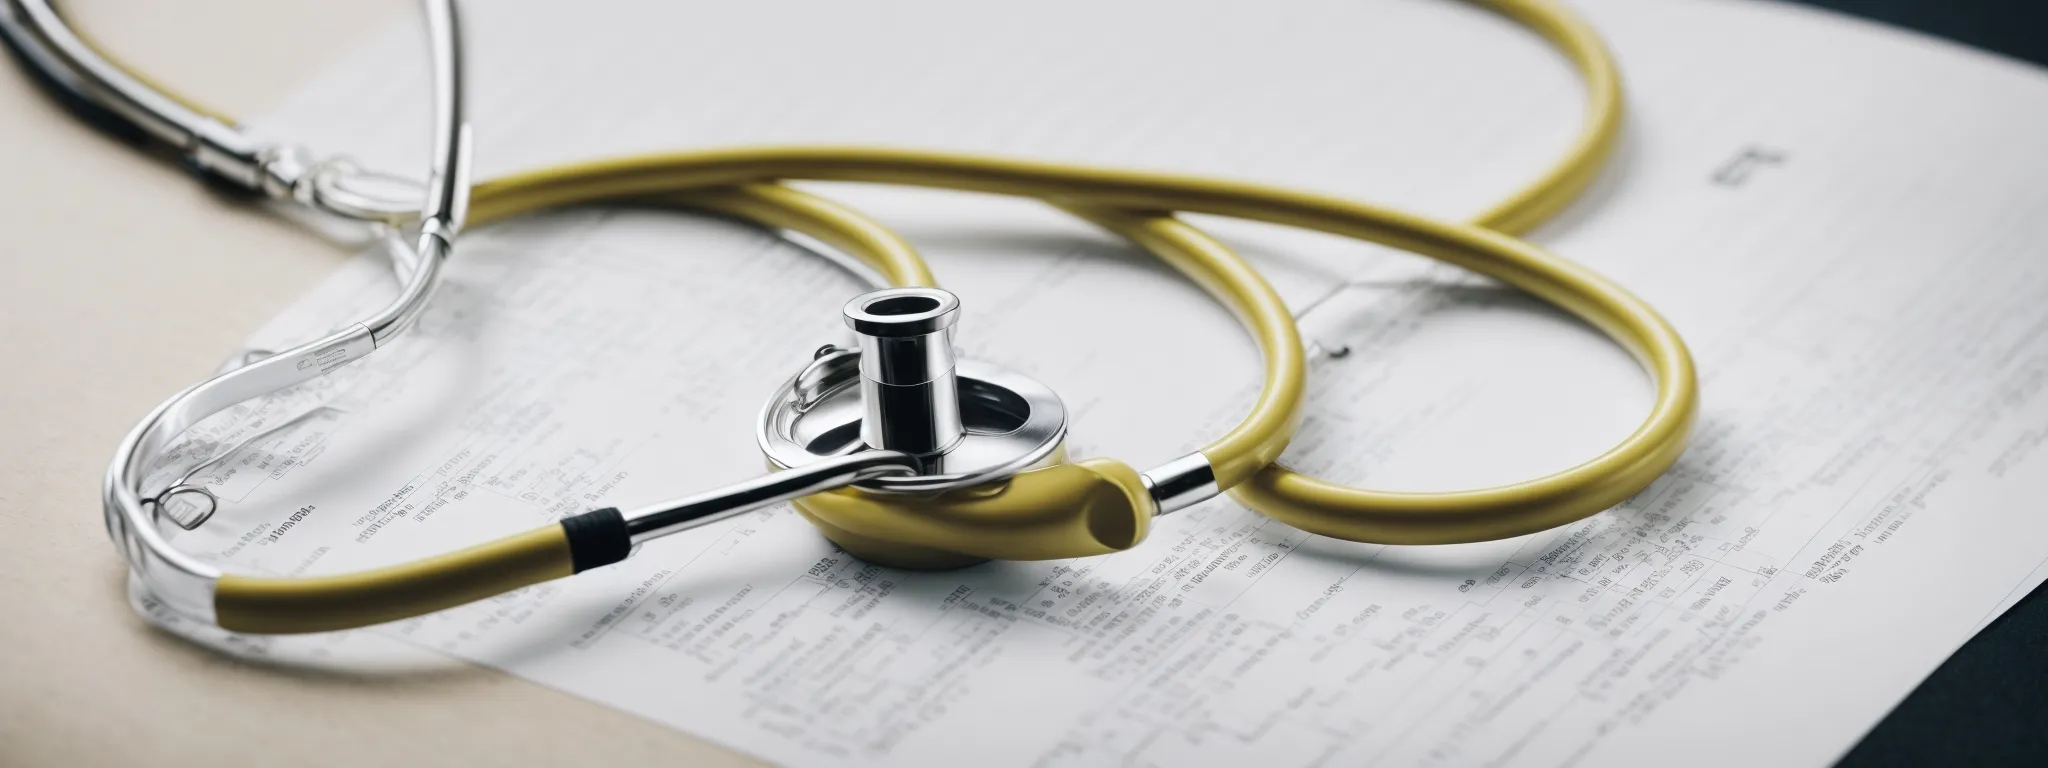 a stethoscope on top of a printed graph highlights the integration of medical and analytic components.